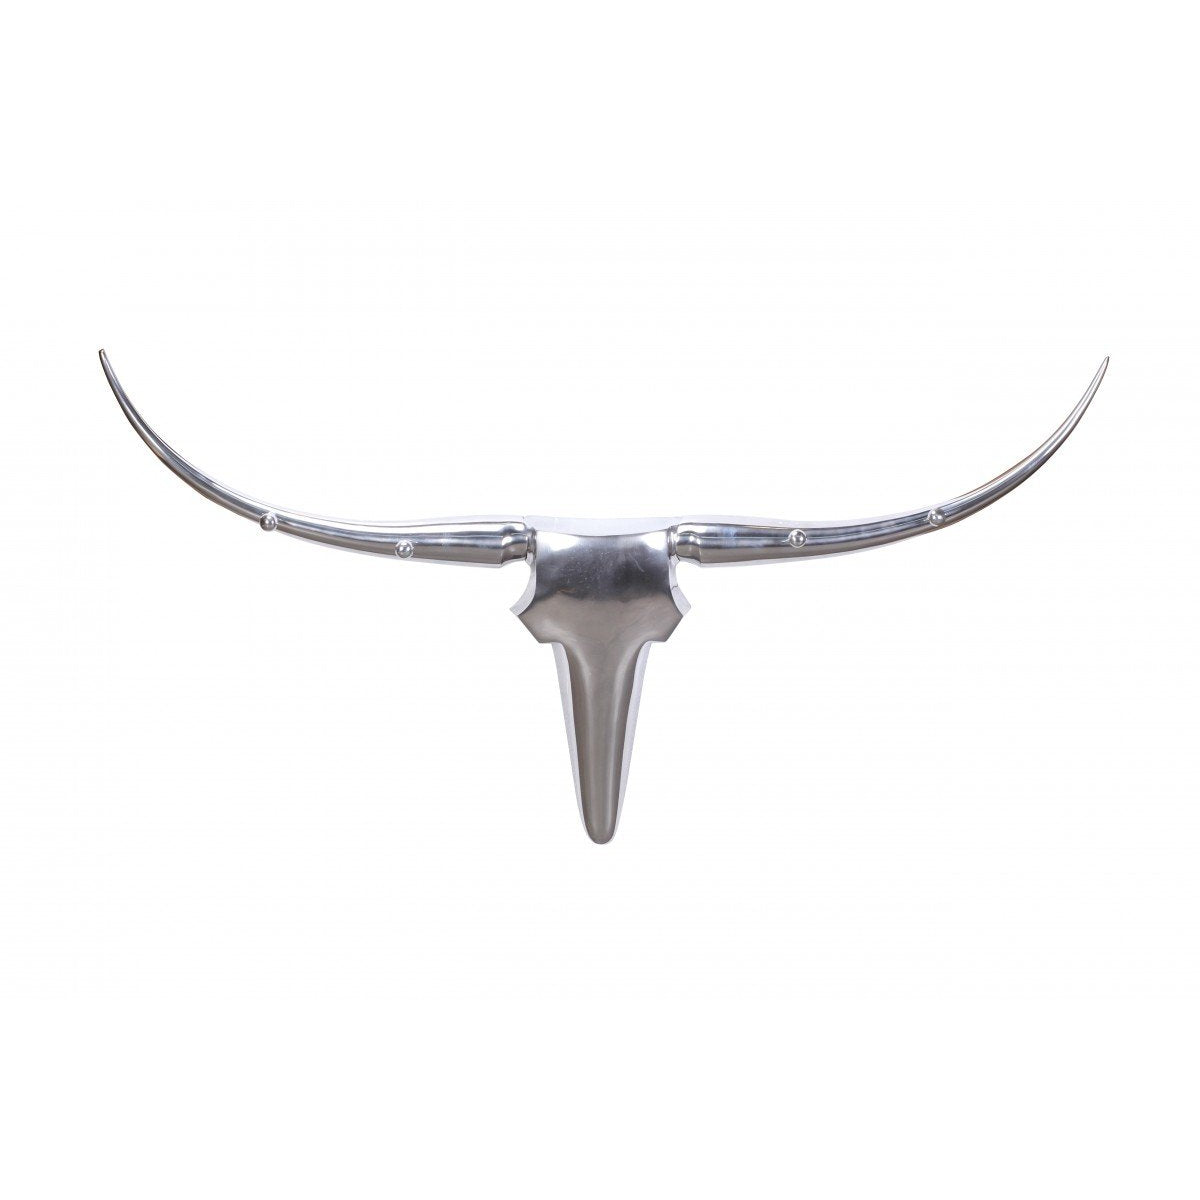 Nancy's Bull Antlers S Decoration - Wall Decoration - Wall Decoration - Wall Antlers - Aluminum - Silver